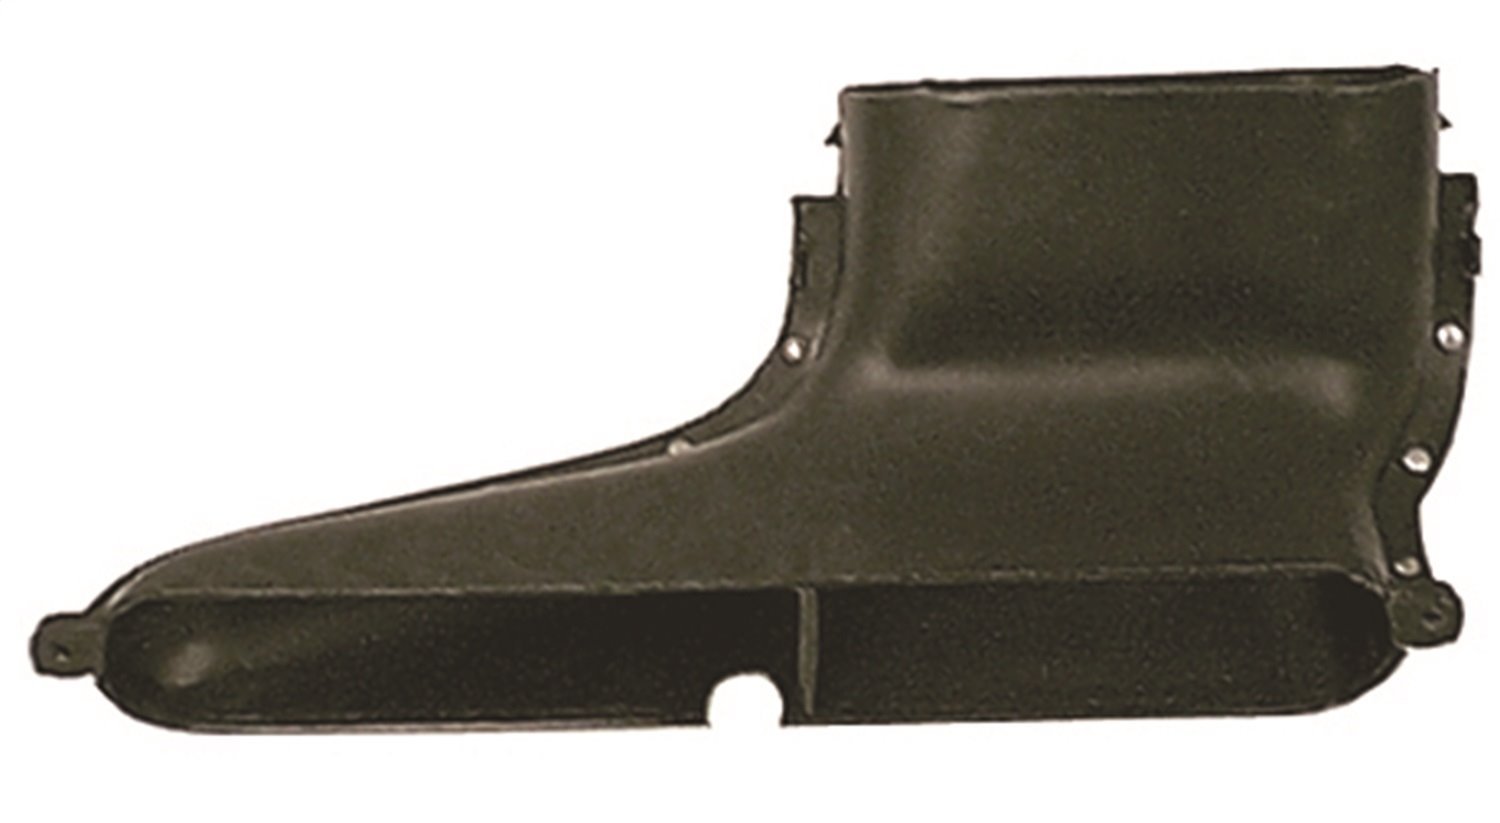 This defroster duct from Omix-ADA fits 78-86 Jeep CJ models.